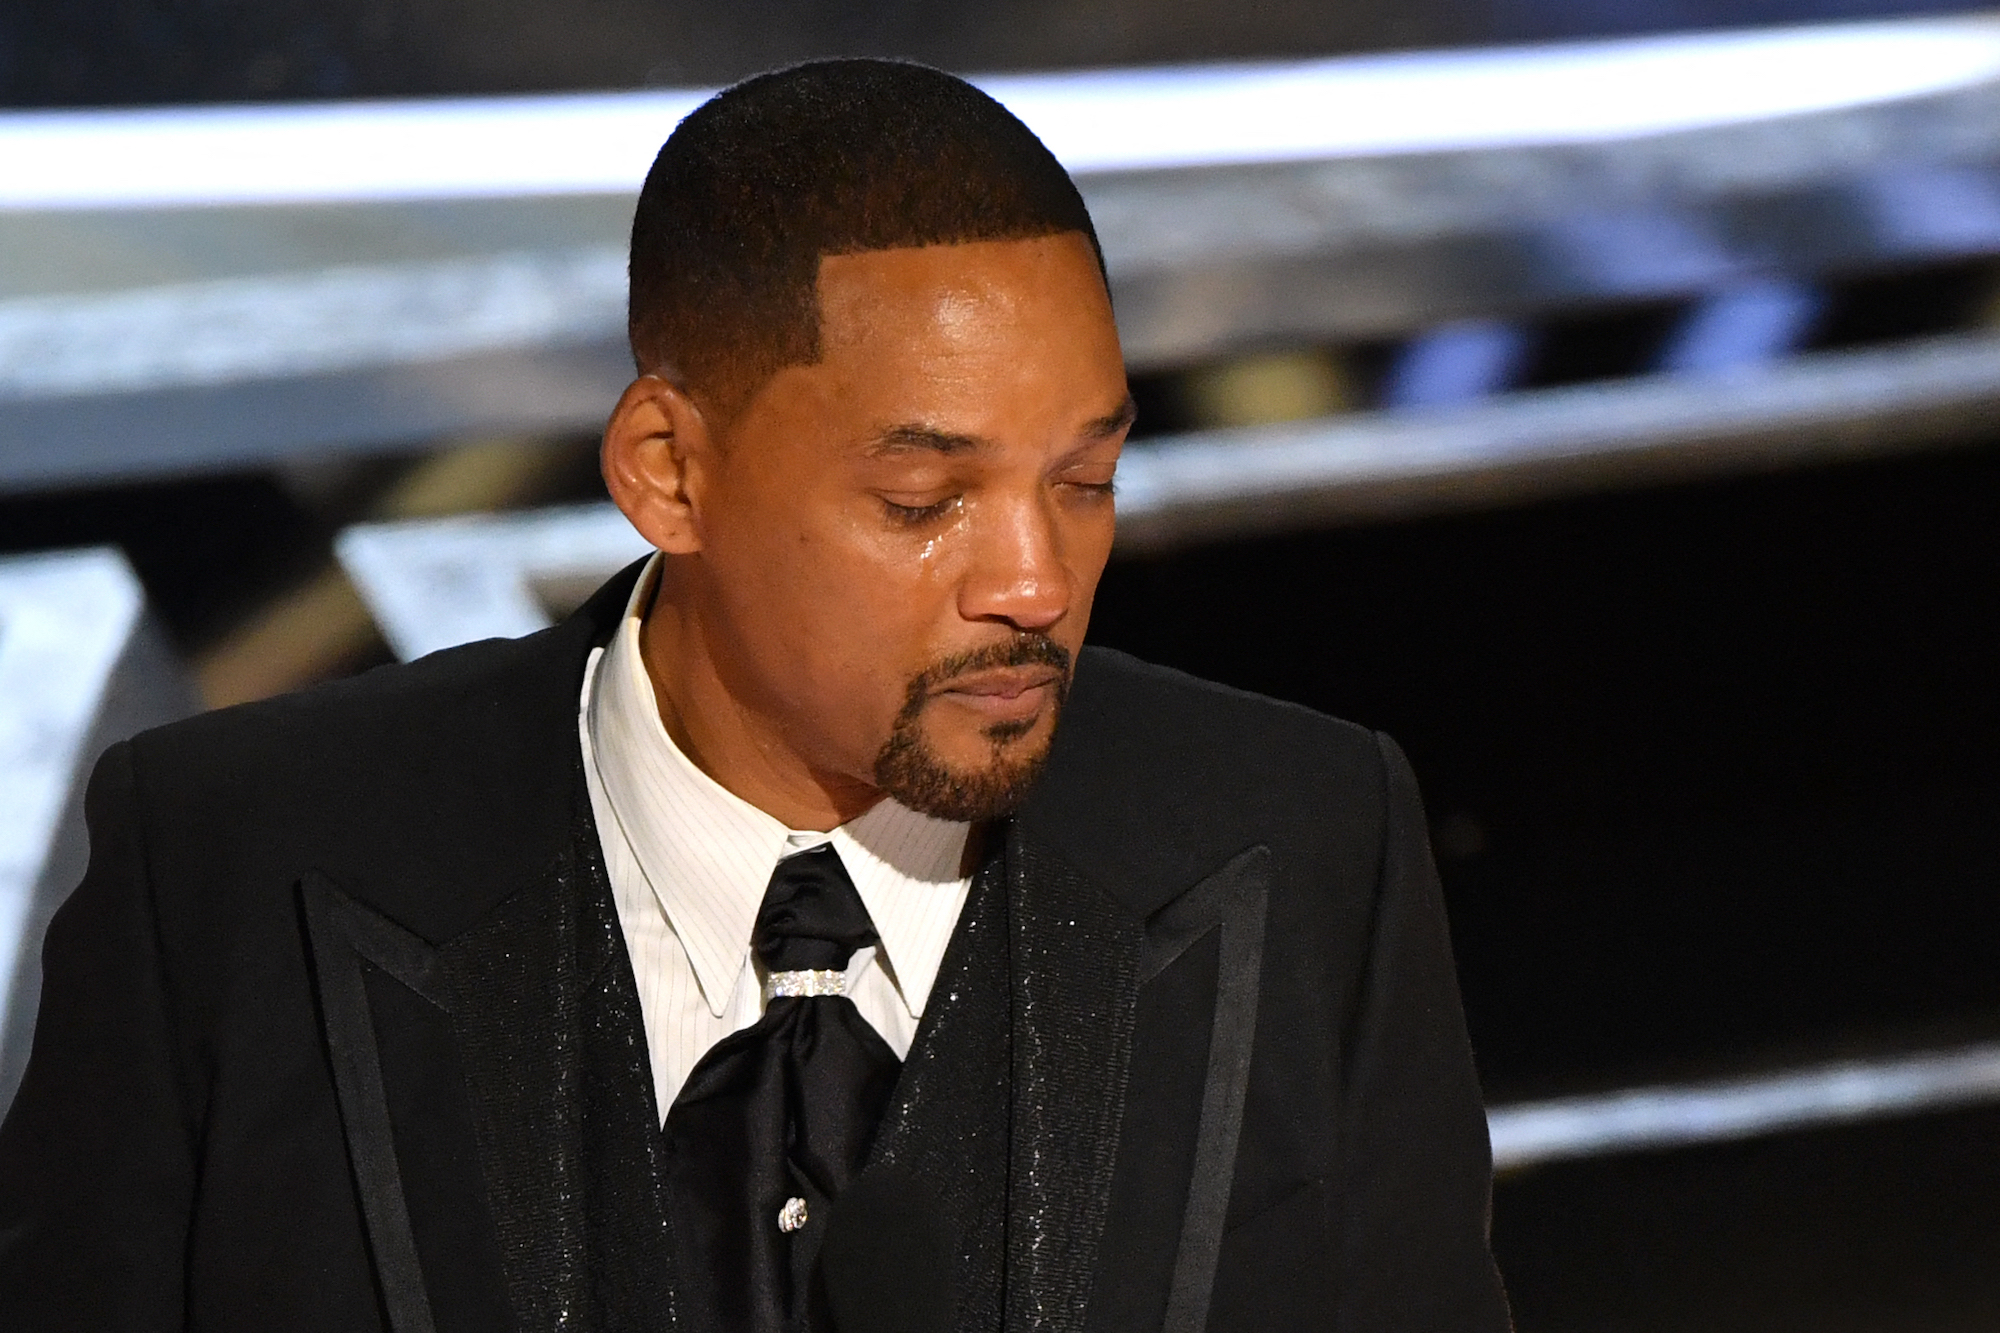 Will Smith cries as he accepts the Oscar after slapping Chris Rock